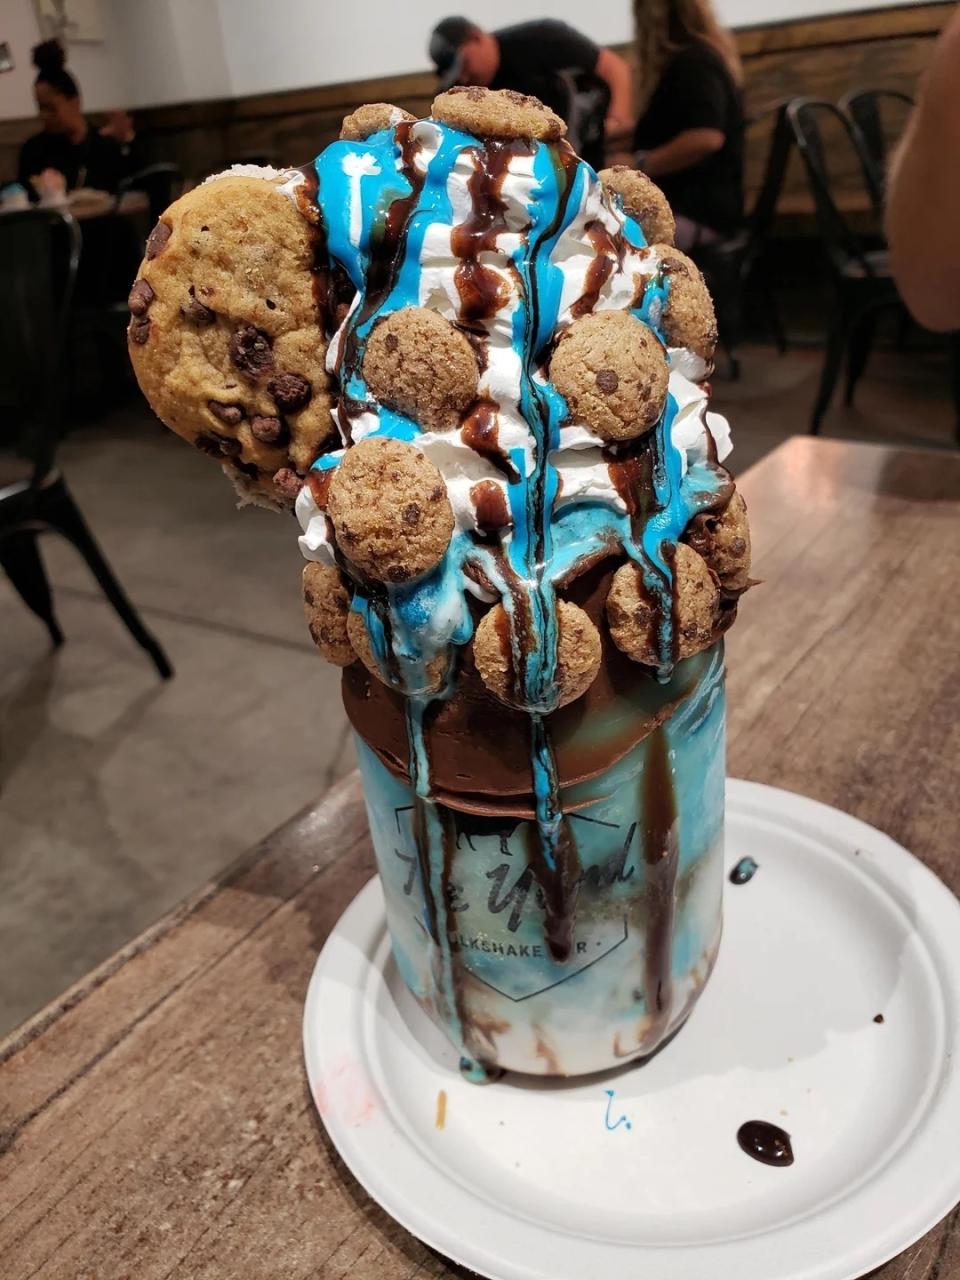 Over-the-top milkshake with whipped cream, chocolate syrup, cookie pieces and a large cookie